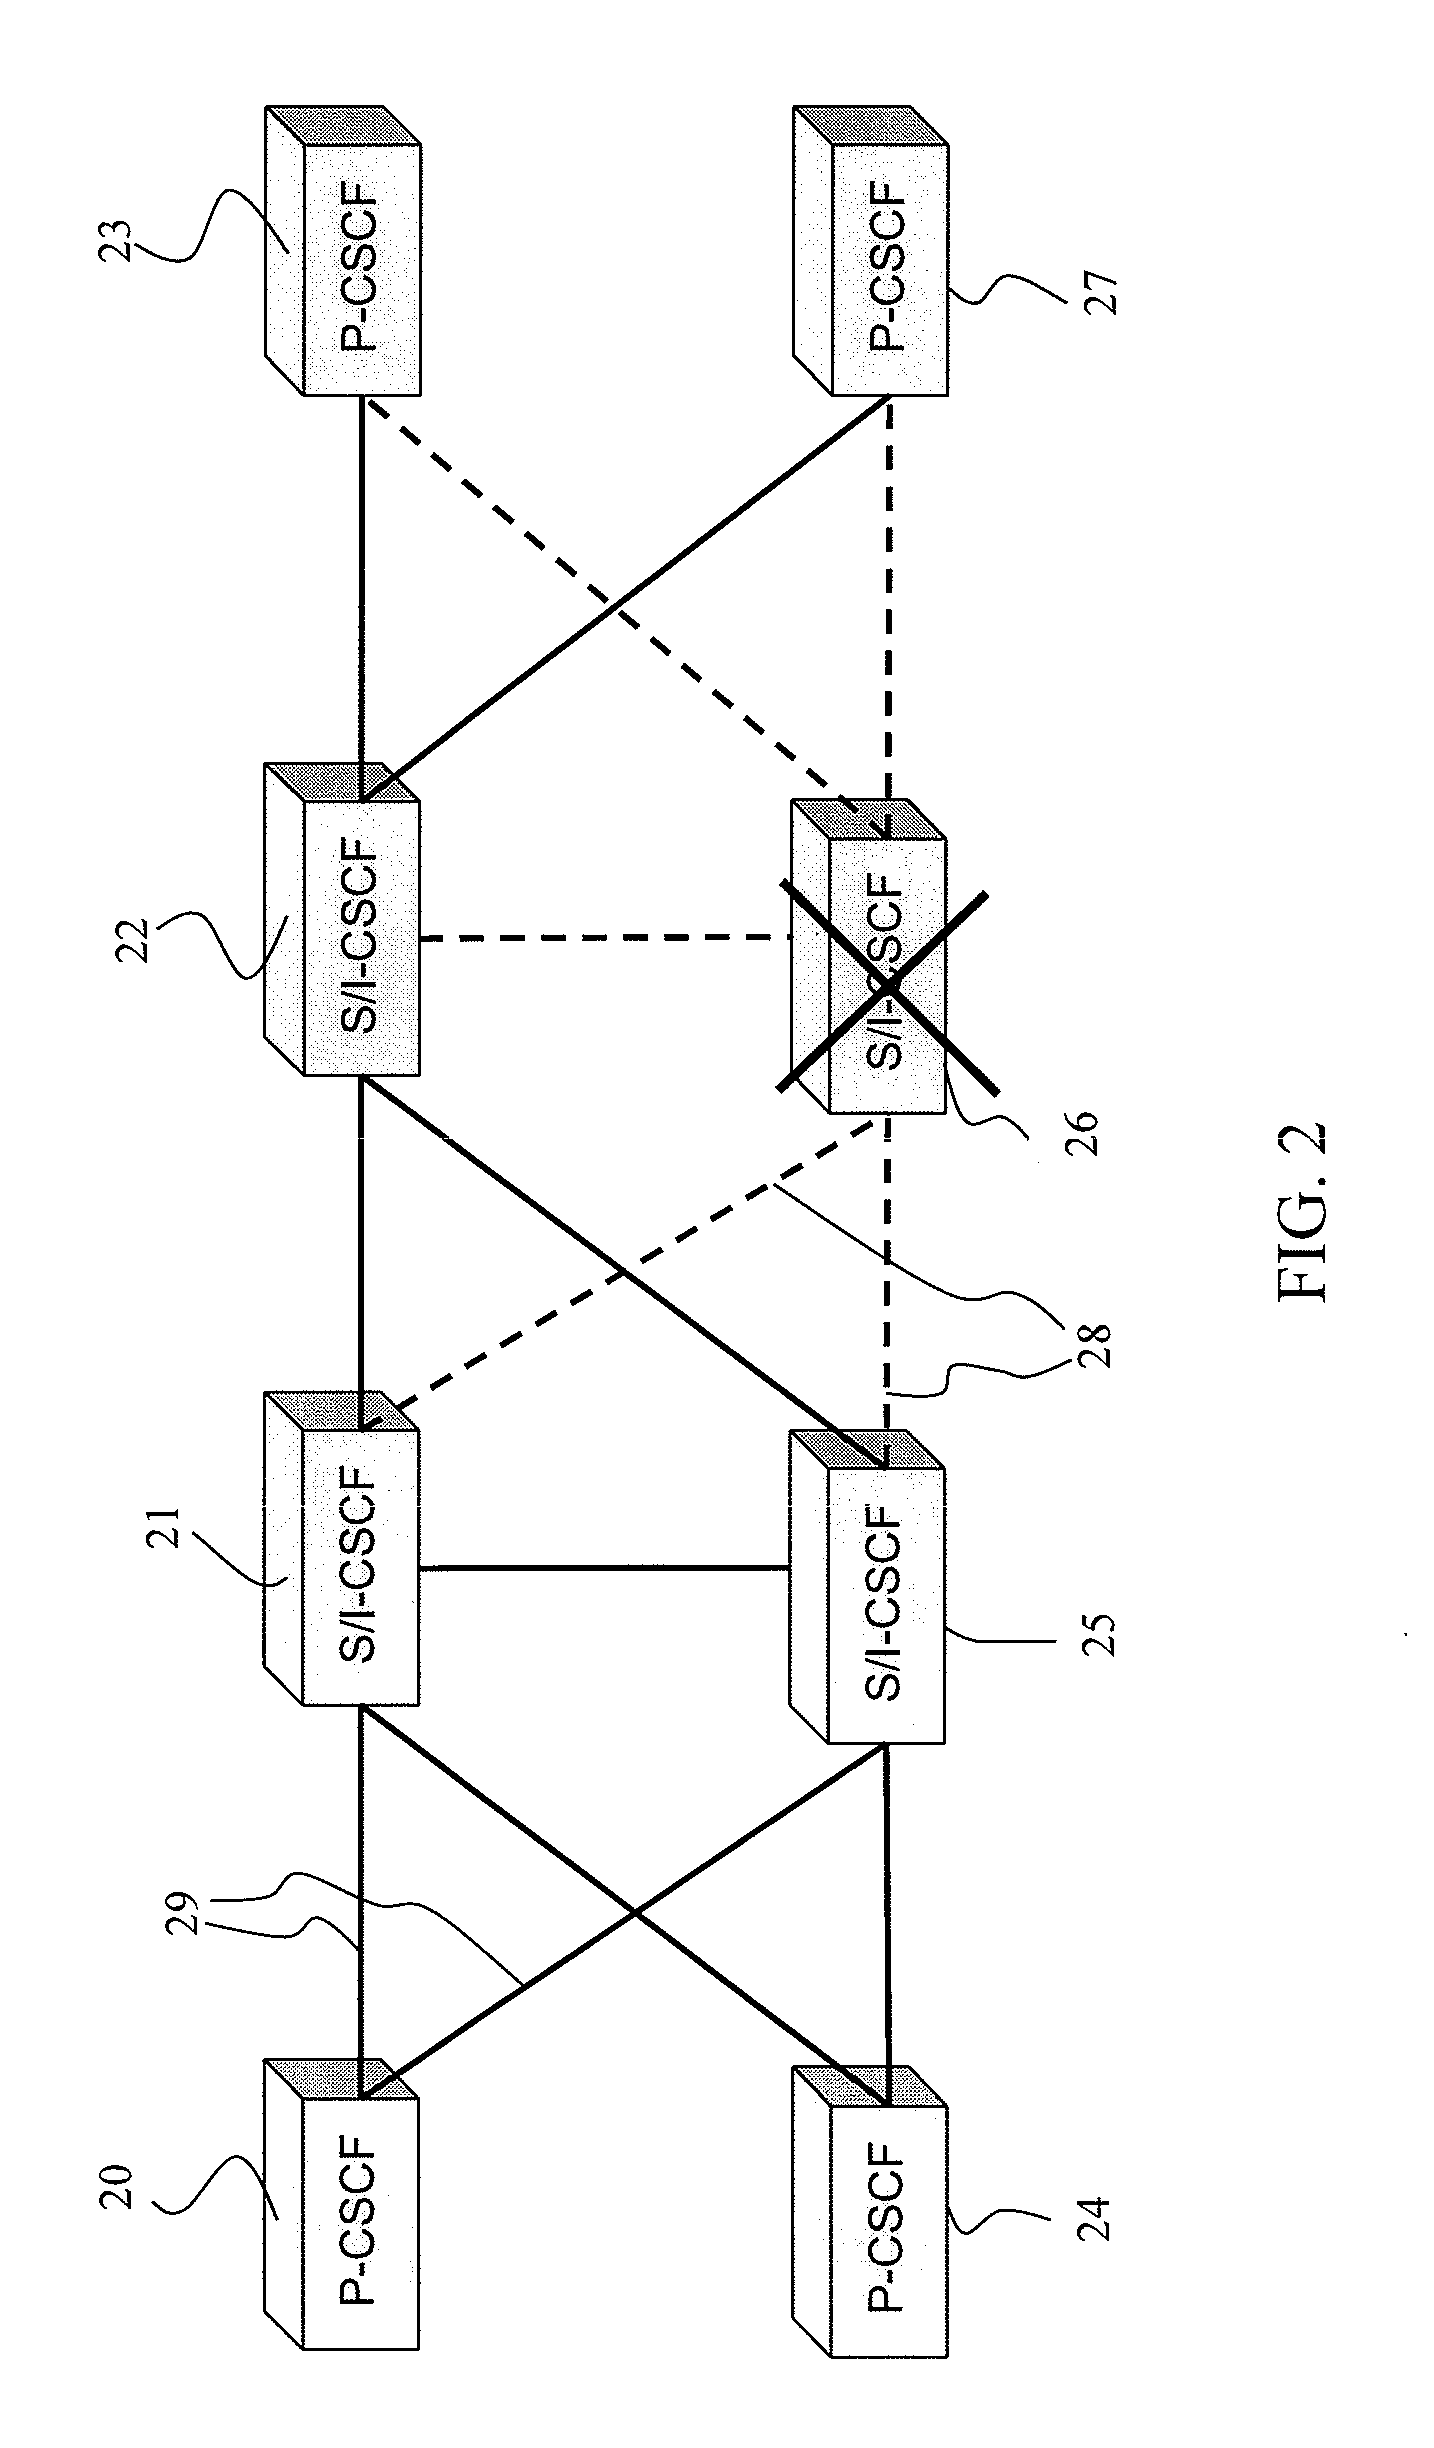 Node failure detection system and method for sip sessions in communication networks